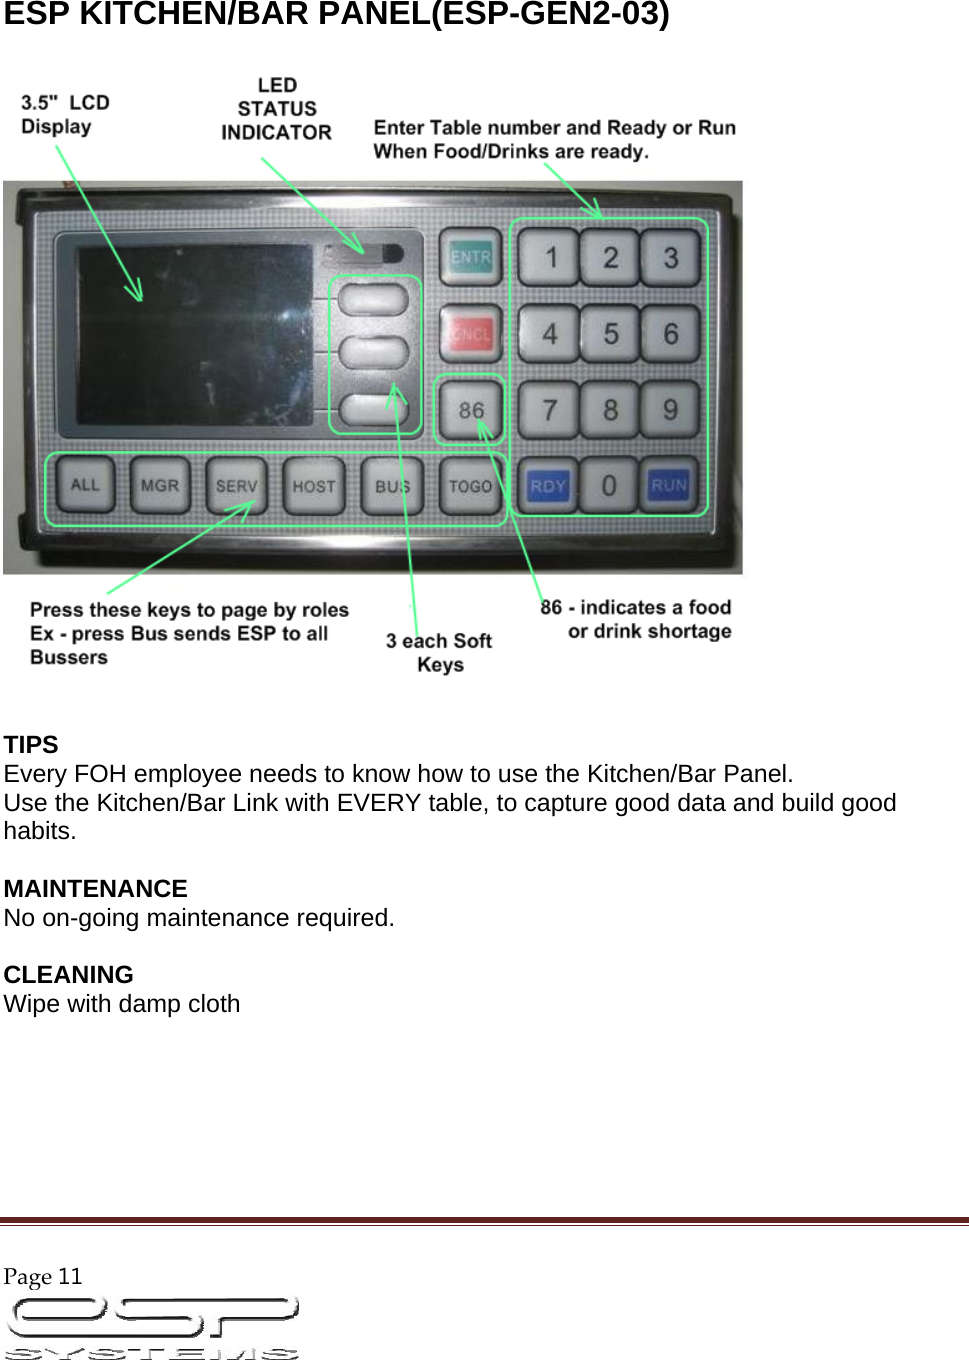 Page11                                                                                                         ESP KITCHEN/BAR PANEL(ESP-GEN2-03)    TIPS  Every FOH employee needs to know how to use the Kitchen/Bar Panel.  Use the Kitchen/Bar Link with EVERY table, to capture good data and build good habits.   MAINTENANCE  No on-going maintenance required.   CLEANING  Wipe with damp cloth       